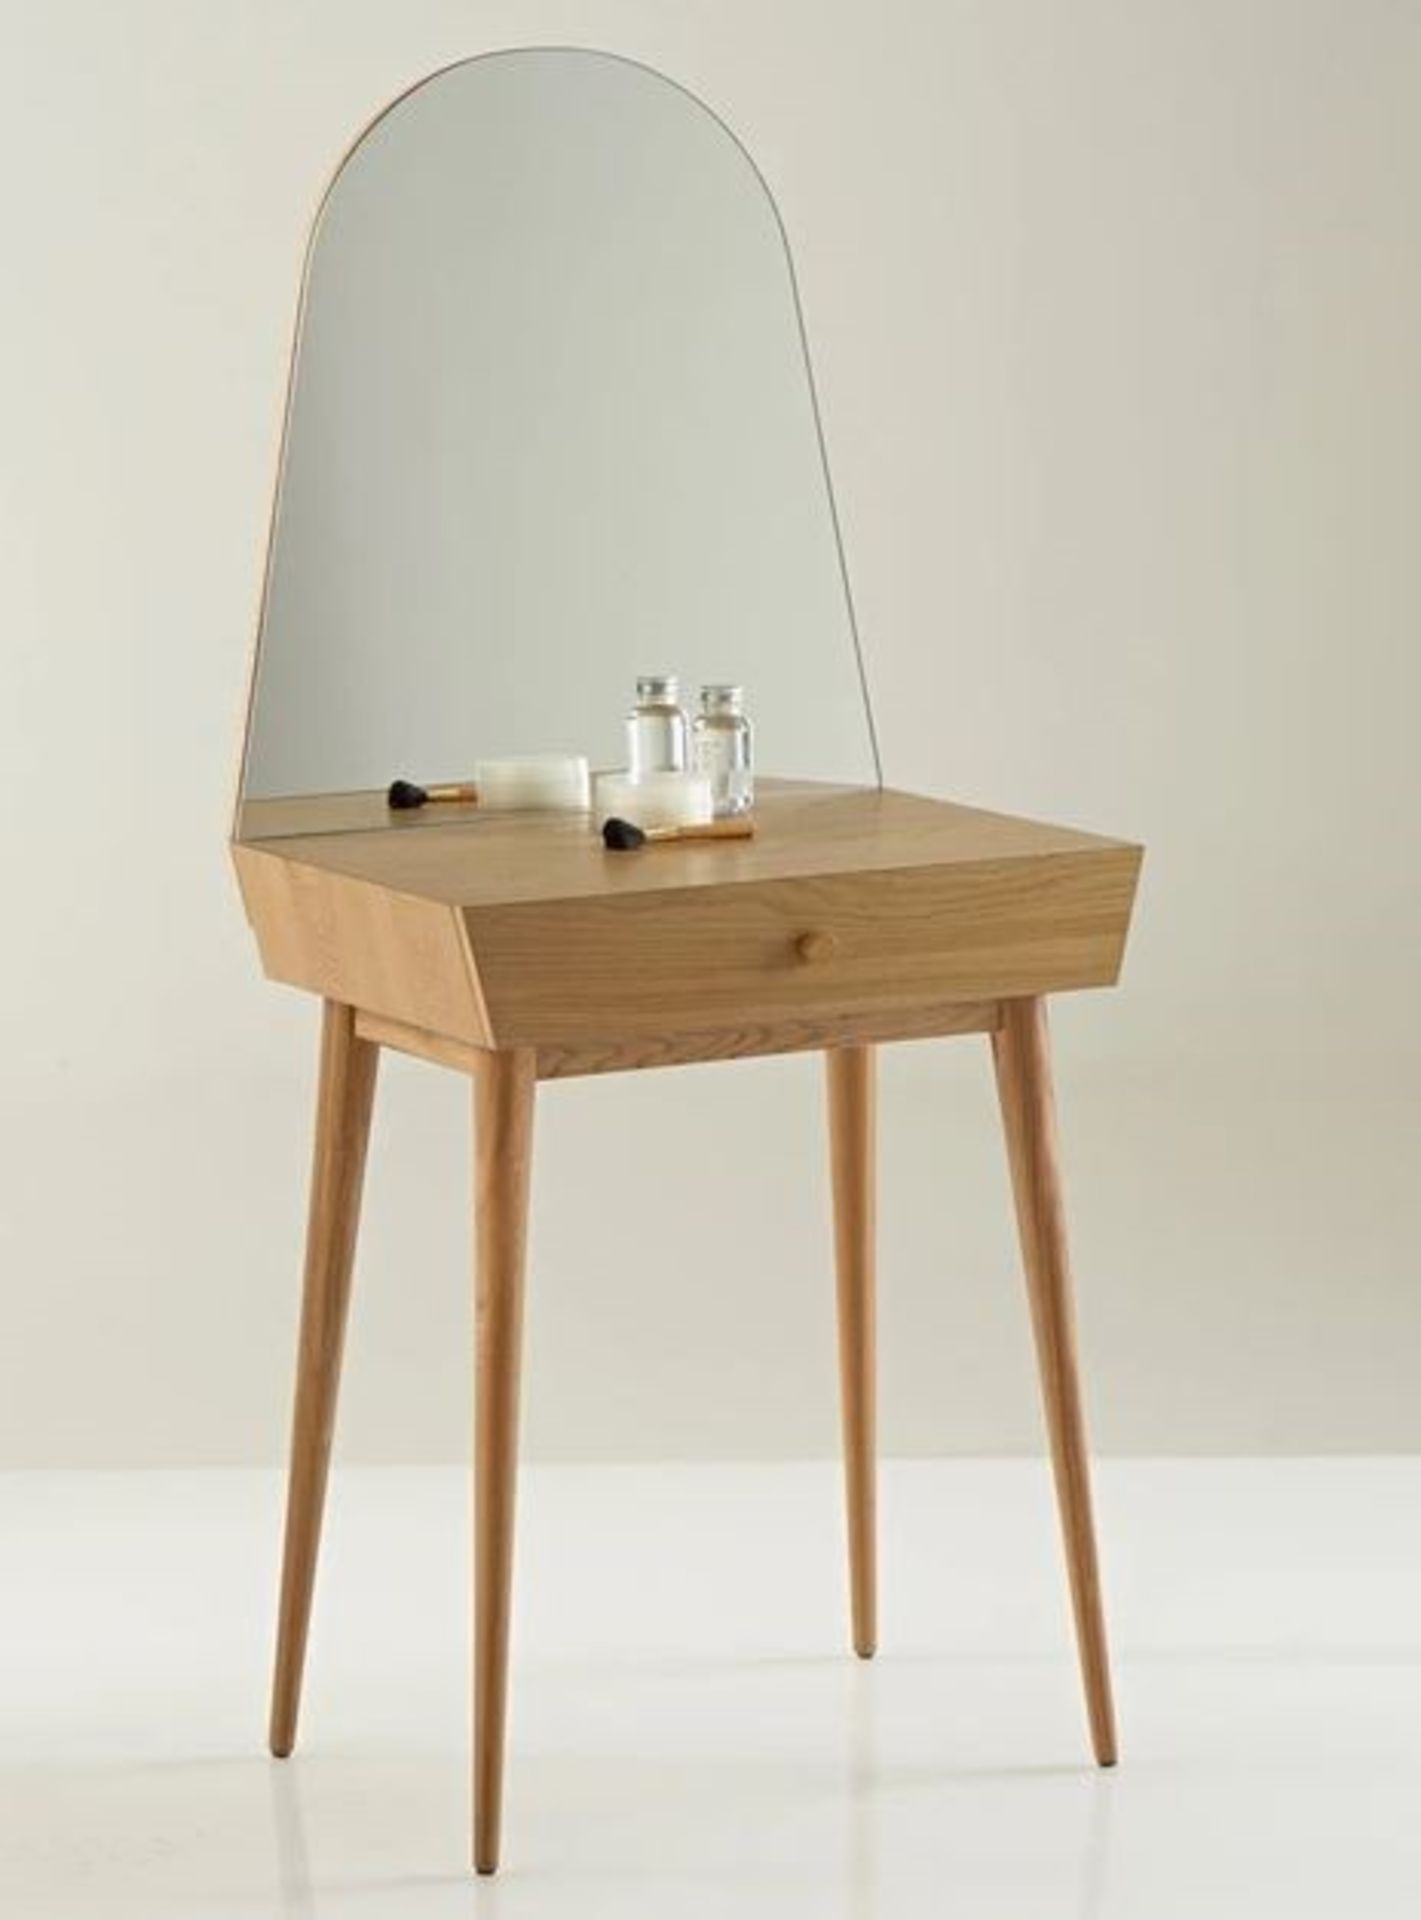 1 GRADE B BOXED DESIGNER CLAIROY 1 DRAWER SCANDI STYLE DRESSING TABLE IN OAK/ RRP £165.00 (PUBLIC